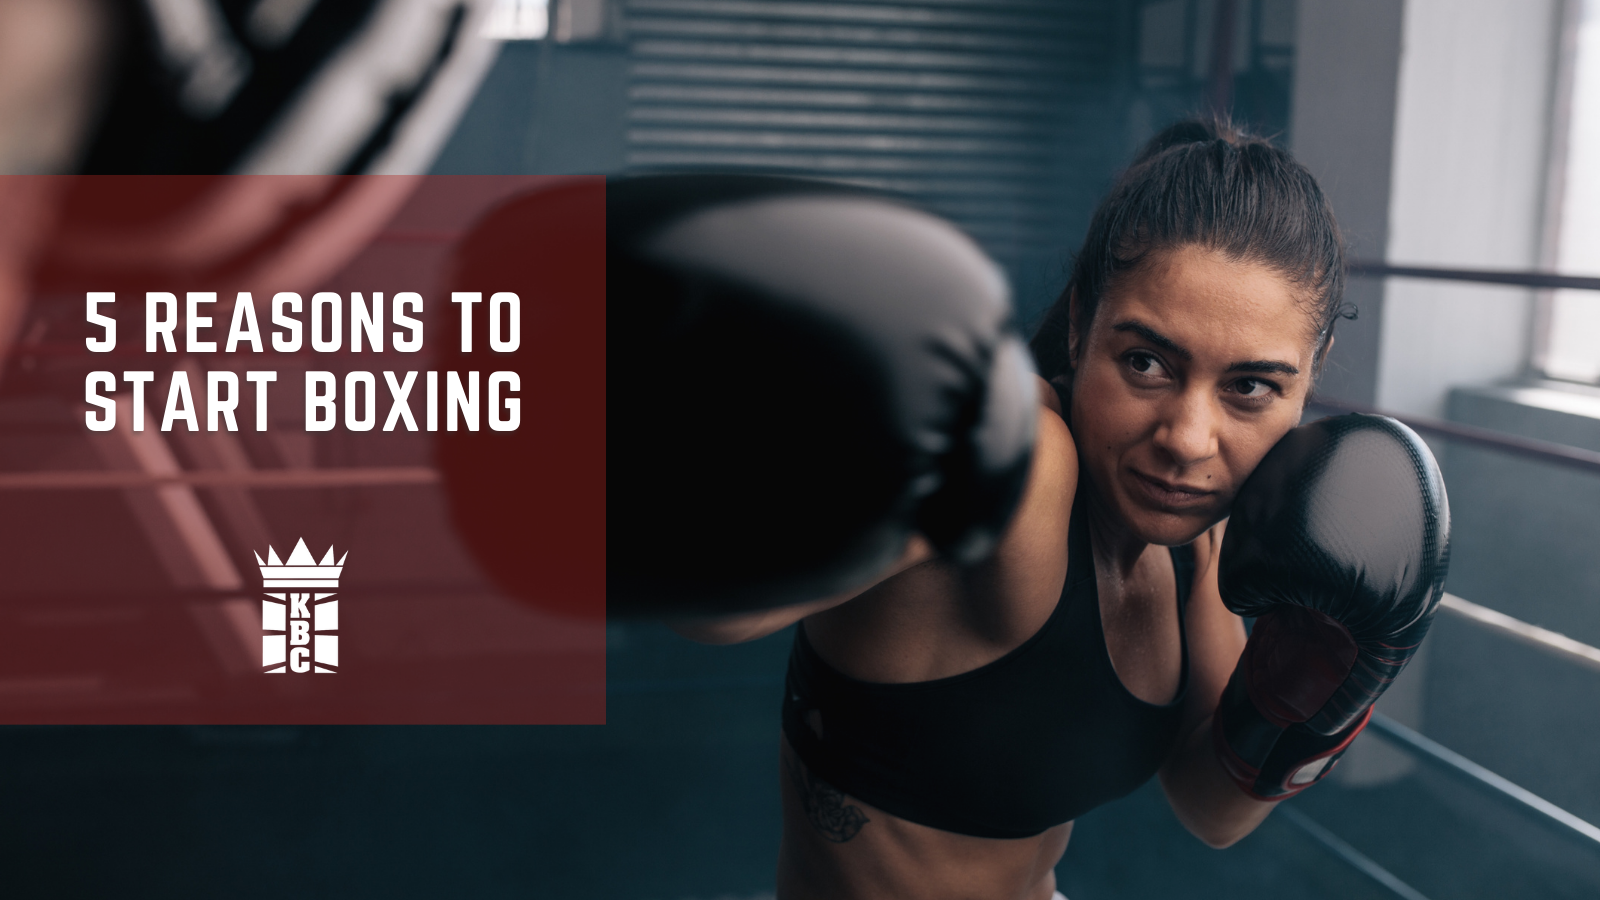 5 REASONS TO START BOXING | With So Many Options We Have The Perfect Starting Point!